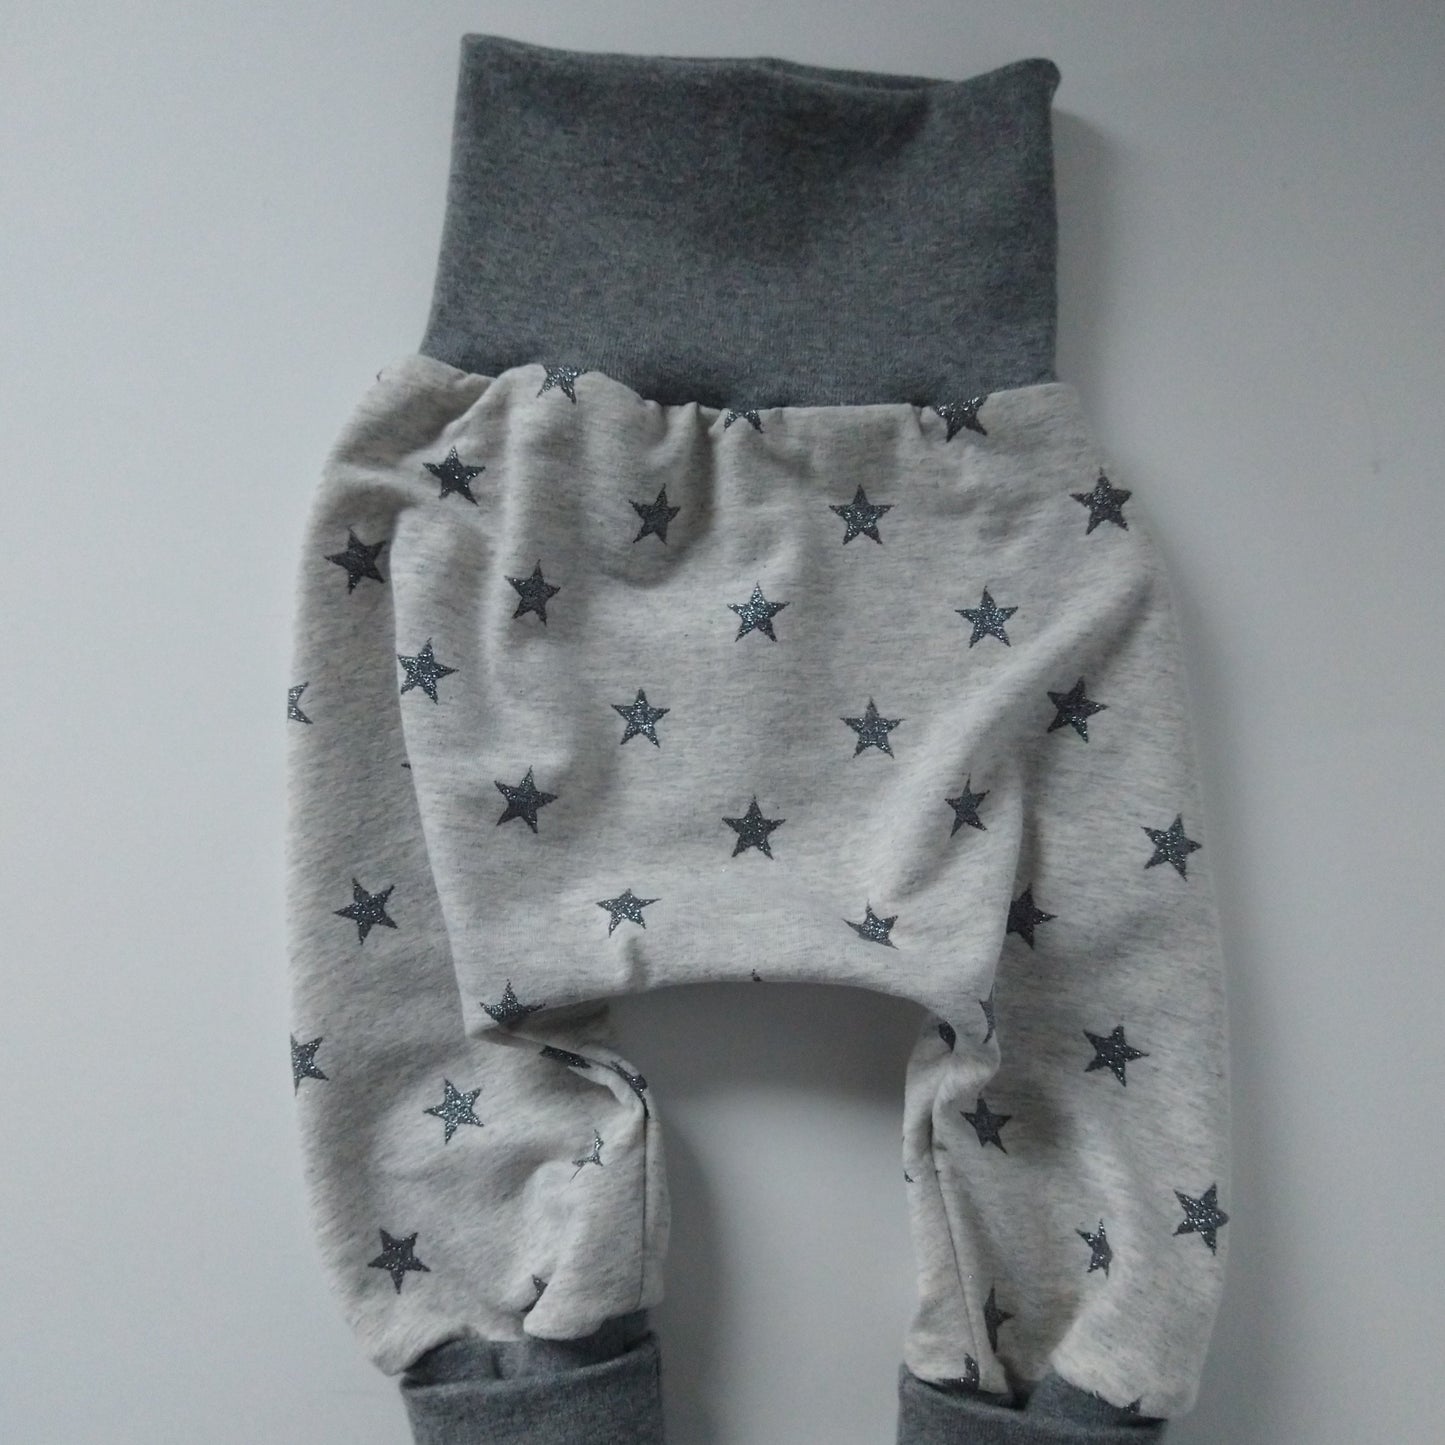 Baby Sweat Pants EUR size 74/80 cm / US size 7-12 months (Handmade in Canada)